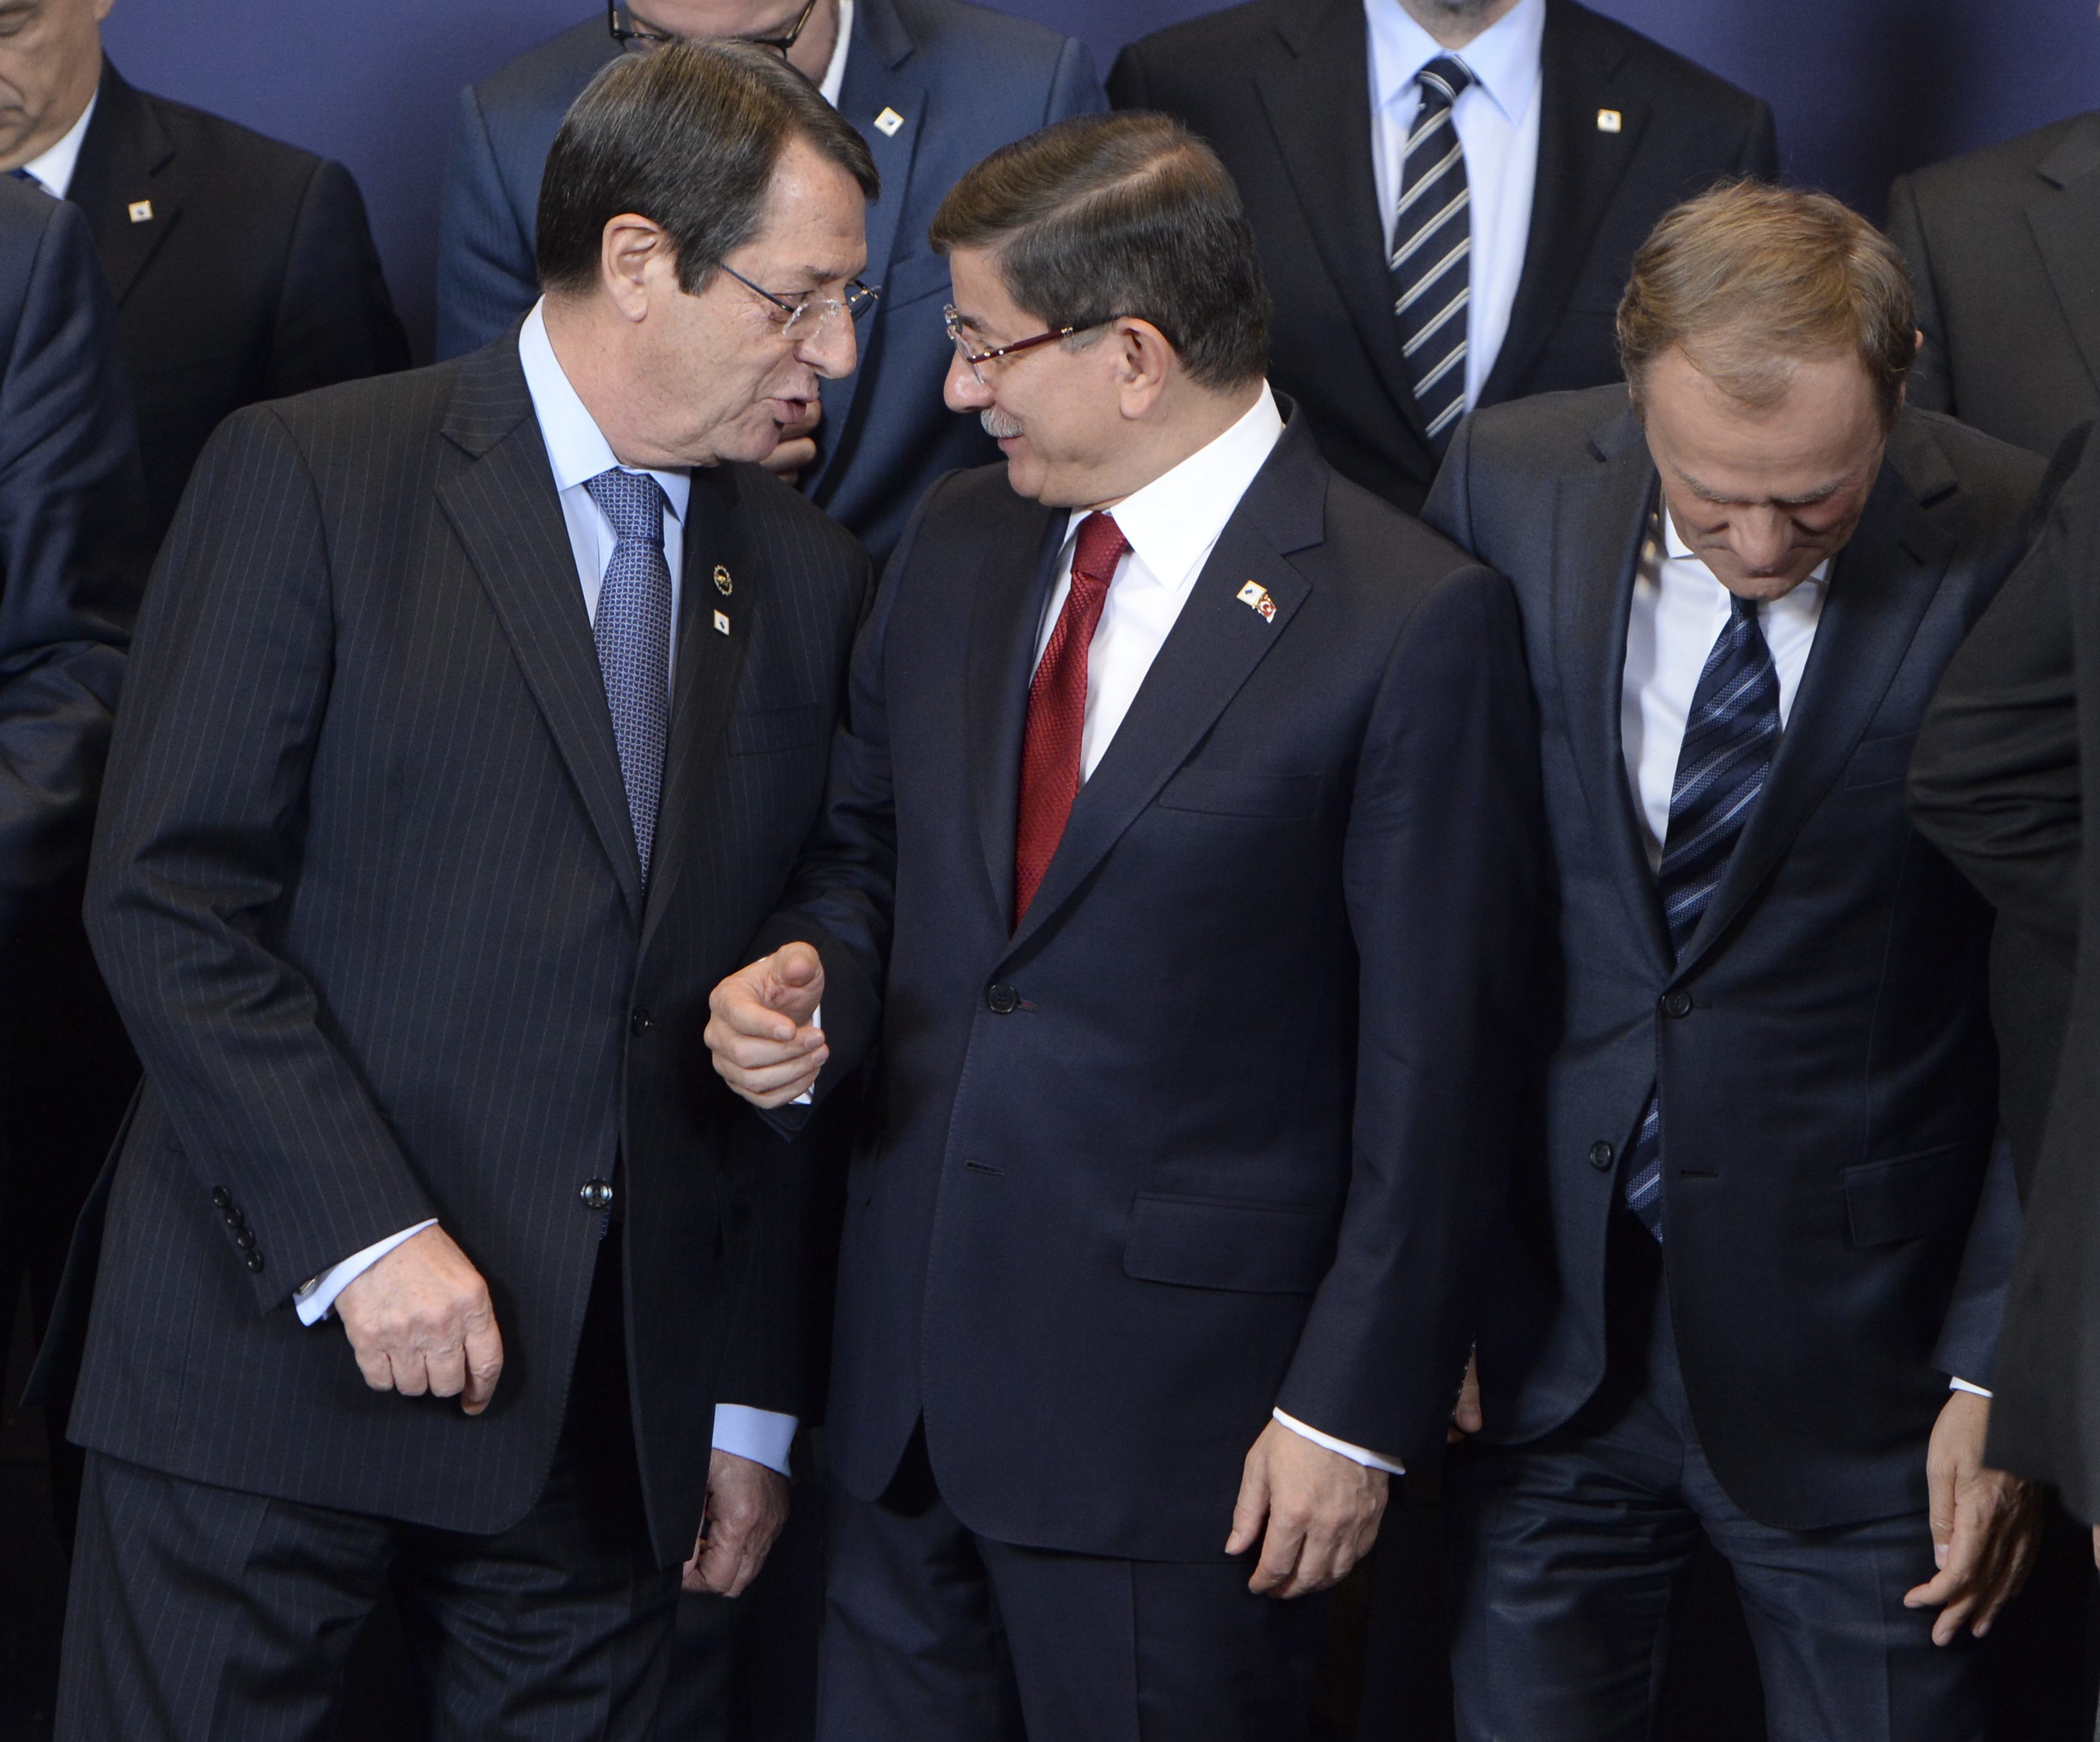 epa05047621 Cypriot President Nicos Anastasiades (L-R), Turkish Prime Minister Ahmet Davutoglu, and EU Council President Donald Tusk line up for the family picture at the start of an EU-Turkey Summit in Brussels, Belgium, 29 November 2015. The European Union hopes to secure Ankara's concrete help in stemming a surge in migration, at a joint summit in Brussels, with the bloc offering financial aid and closer ties in return. Europe is facing its largest people movements since World War II, with almost 900,000 migrants and asylum seekers arriving this year. Many, including large numbers from war-torn Syria, transit through Turkey and board boats headed for Greece. EPA/STEPHANIE LECOCQ